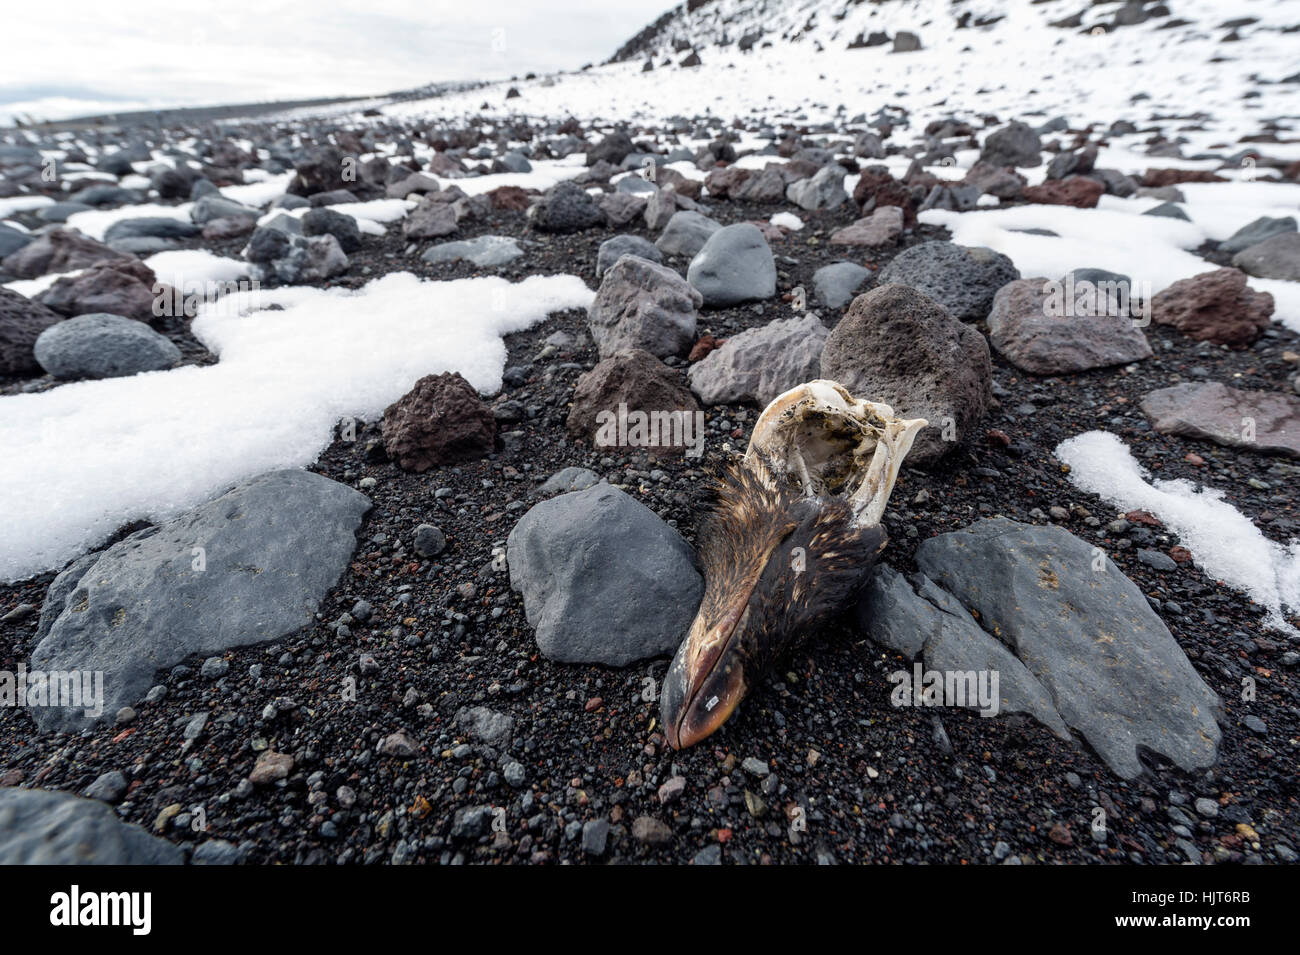 The skull of an Adelie Penguin in the snow on a volcanic beach in Antarctica. Stock Photo